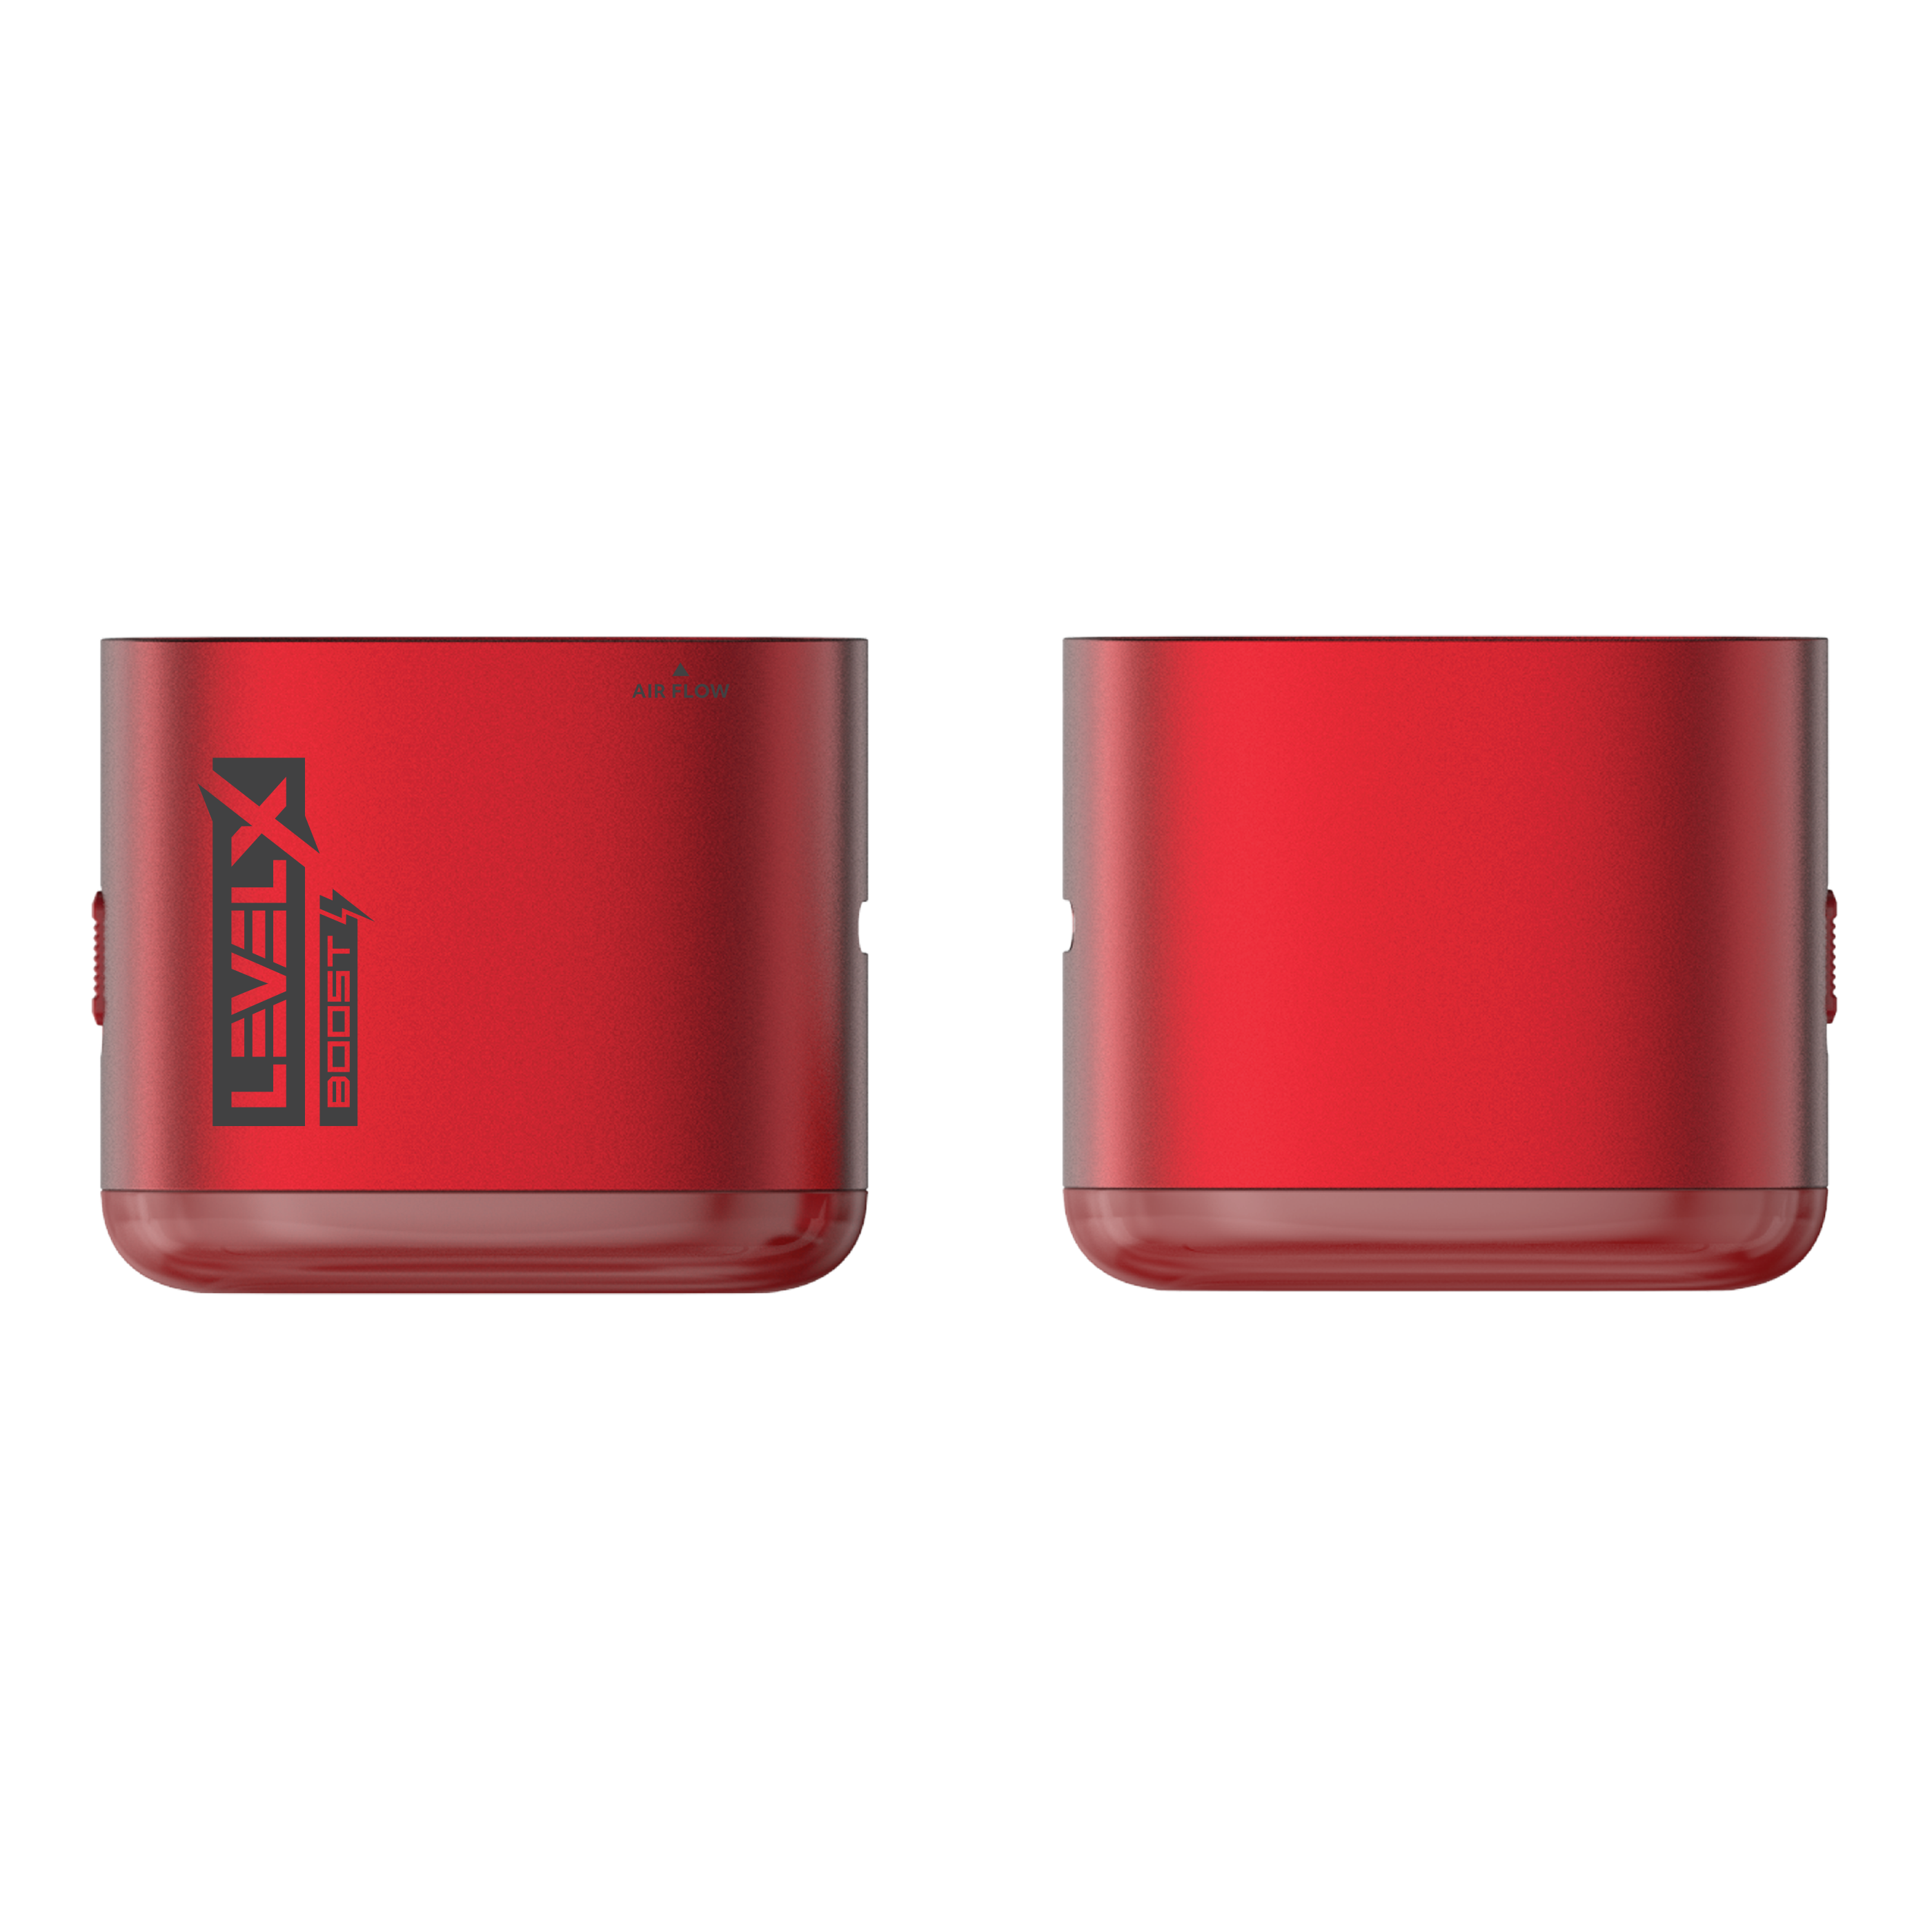 Meet the Level X Boost pod vape, designed to elevate your vaping journey with its versatility and top-notch performance. This innovative device boasts a dual mode firing mechanism, easily activated with a switch.